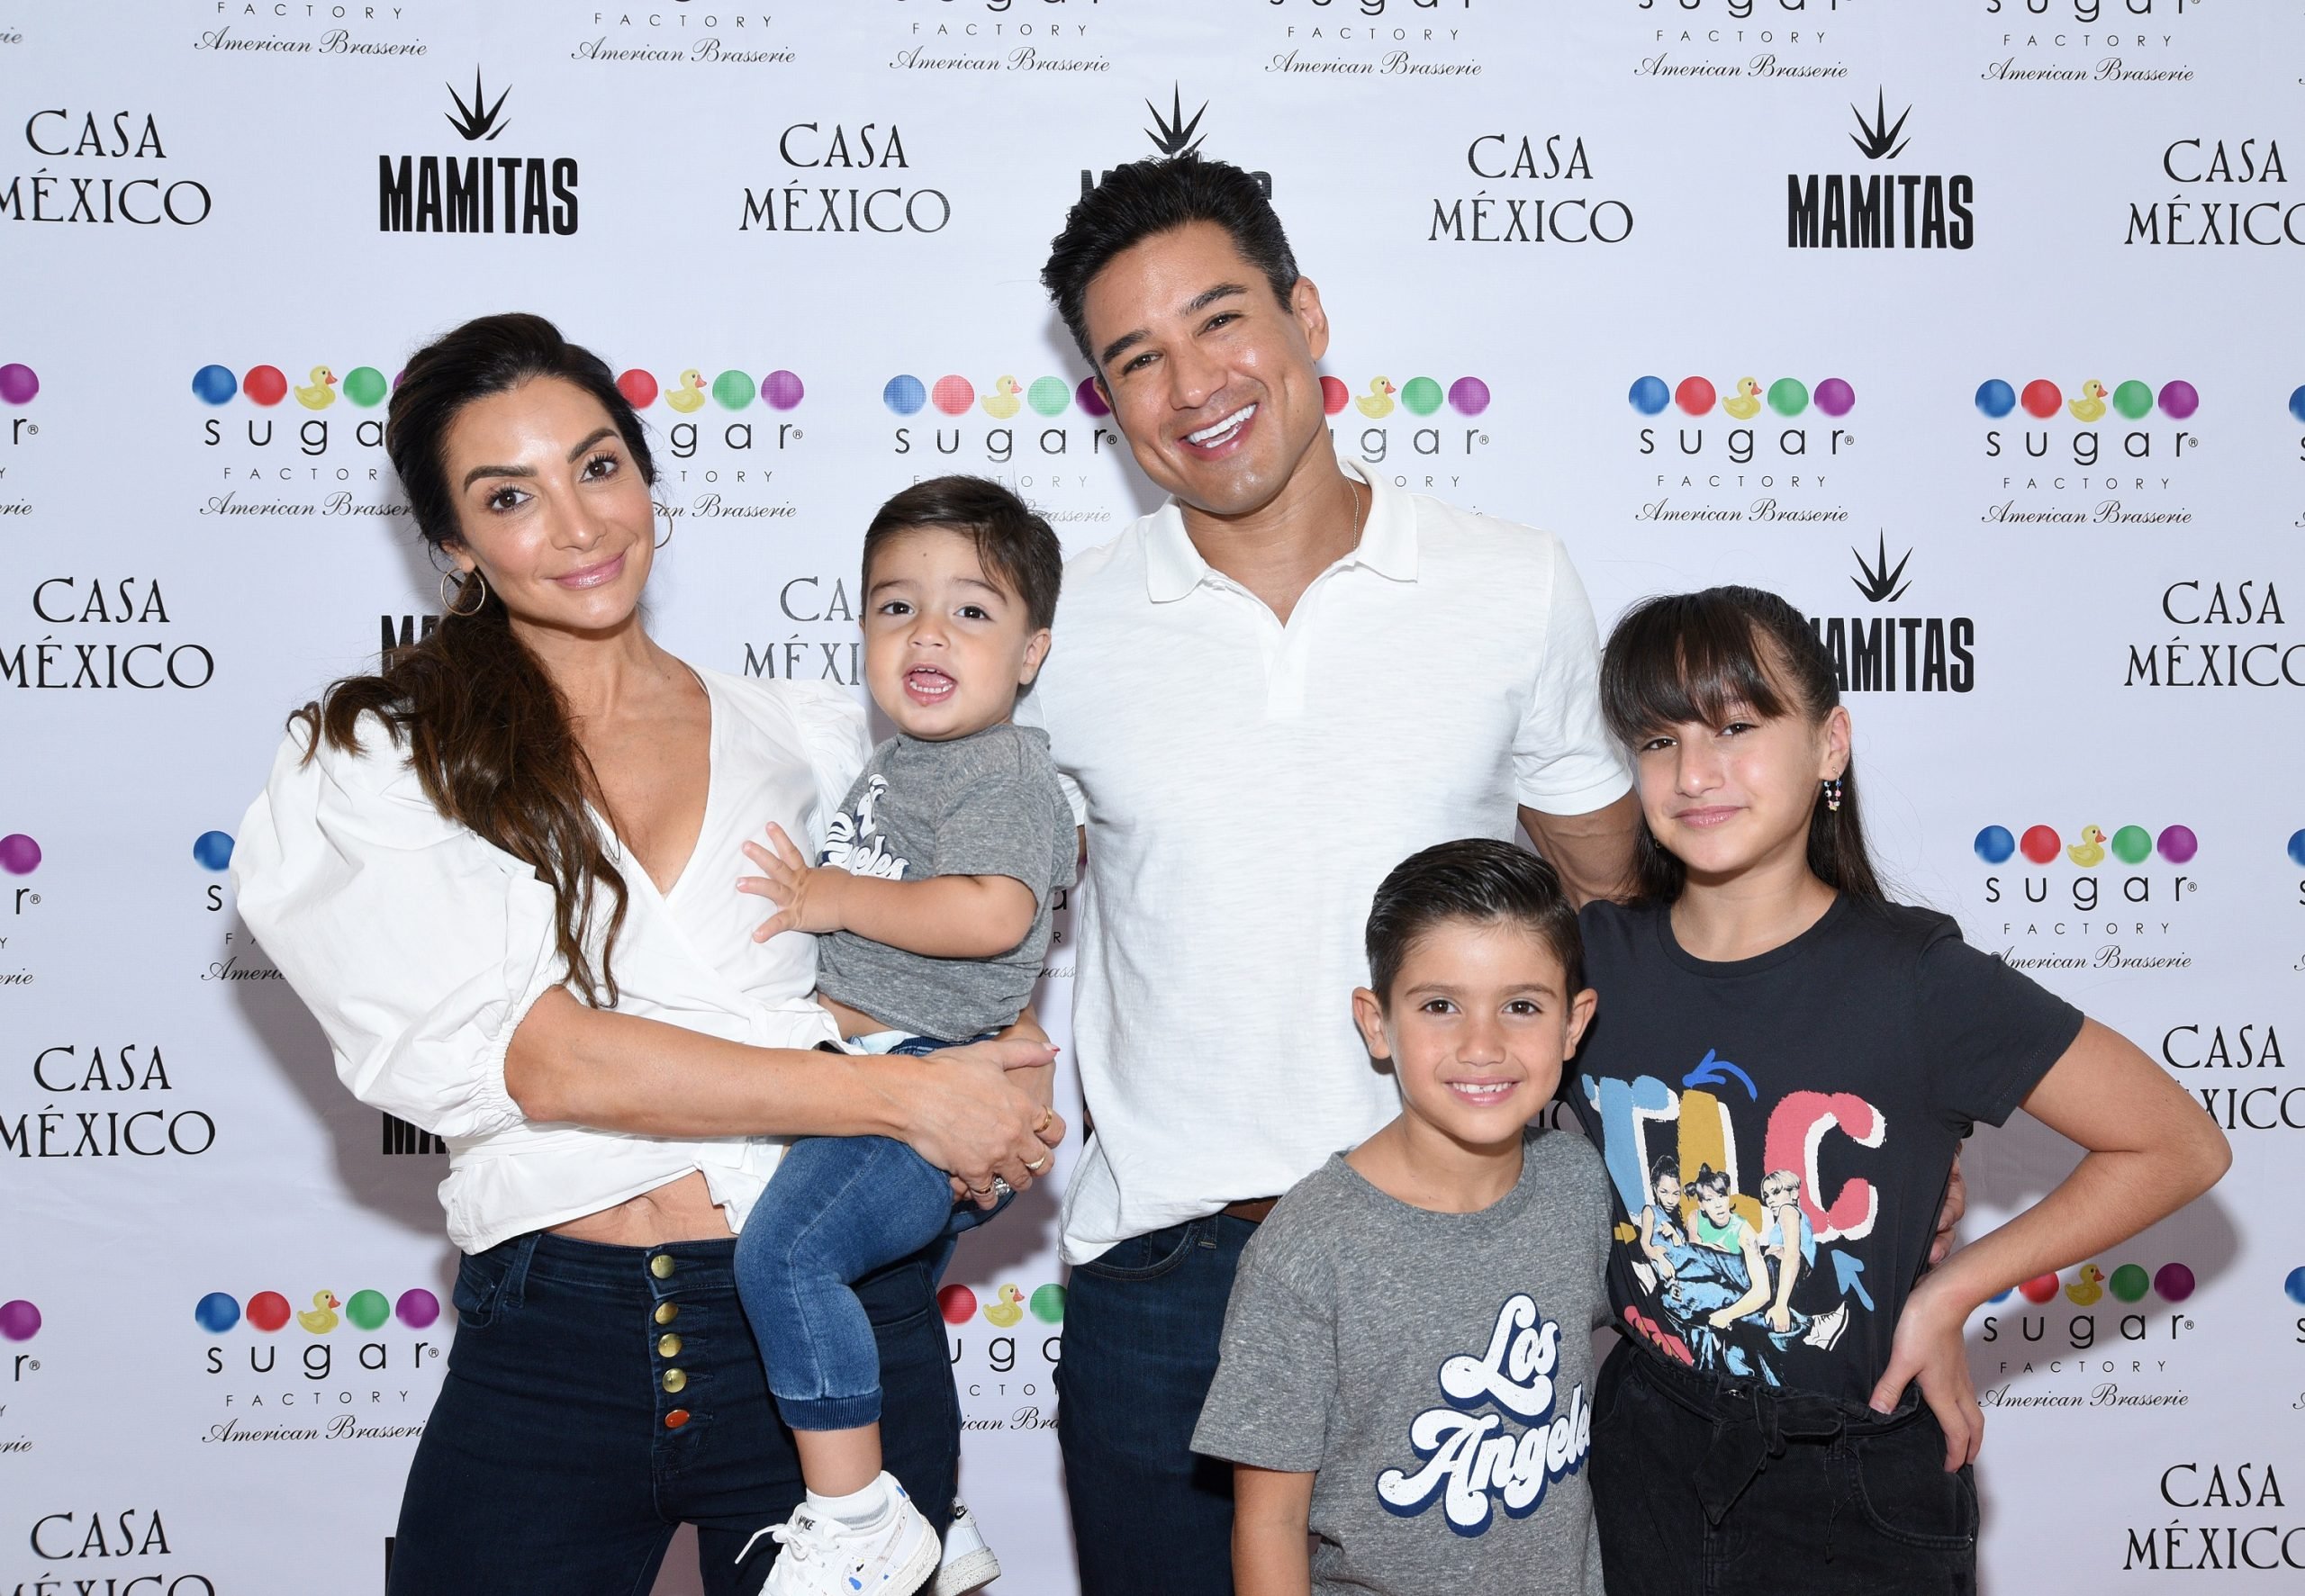 Mario Lopez Revealed His Kids Have 1 Condition For Watching Dad on TV